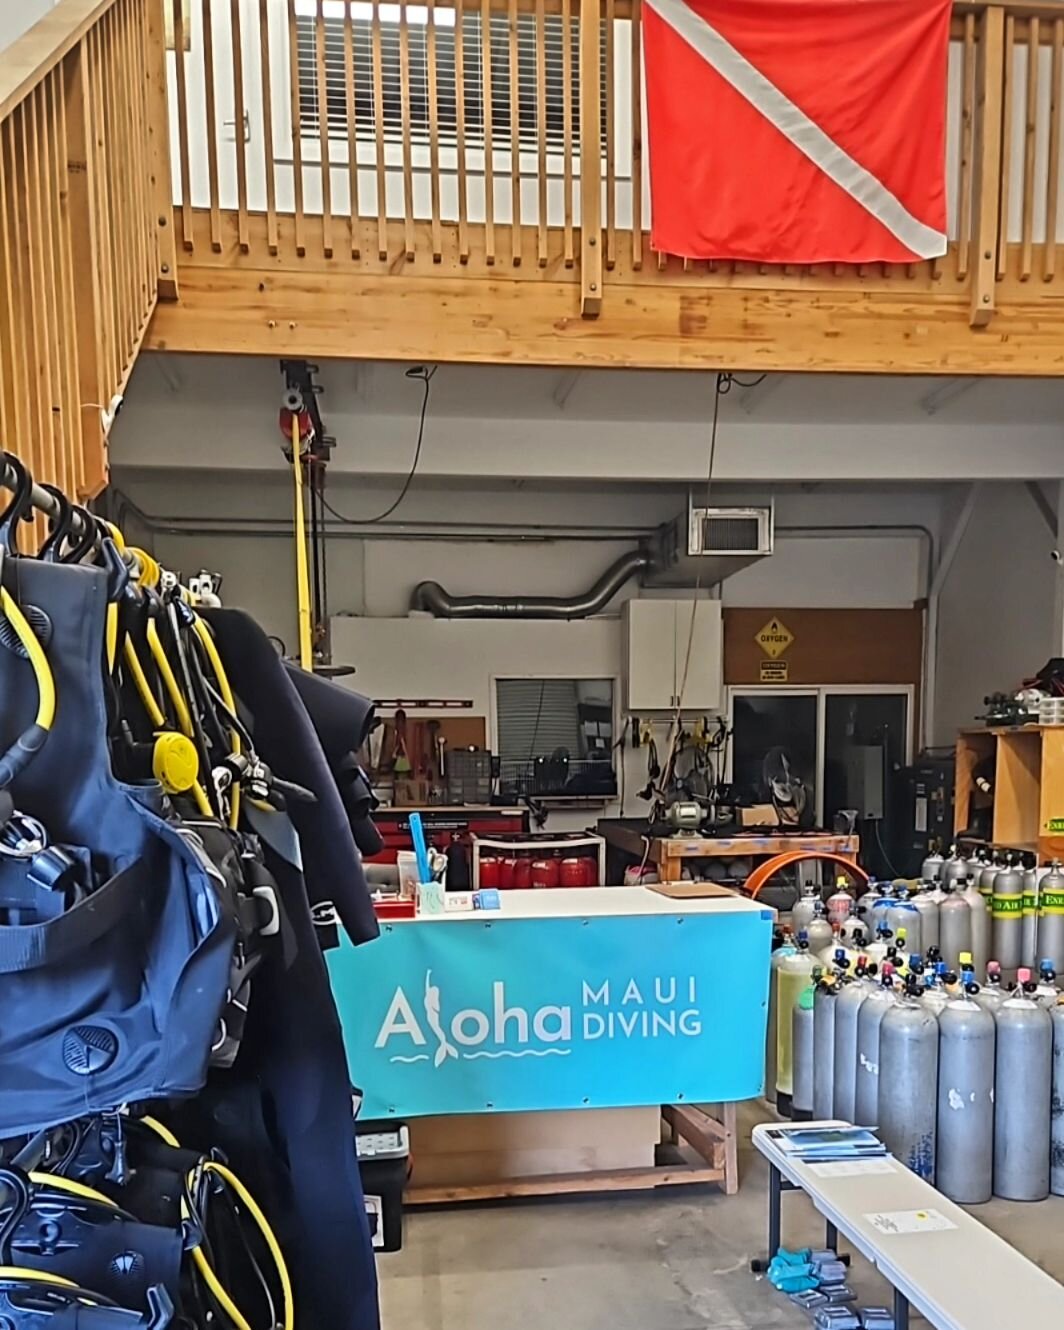 ALOHA! 🌺 NOW OPEN SATURDAYS 10-2. To meet your gear rental needs, Aloha Maui Diving now has extended opening days! Mon to Fri 10-4. Sat 10-2.
Scuba gear rentals, dive tours, and more! 
Located in Lahaina at 130 Kupuohi St, Ste D4.

#scubadiving #alo